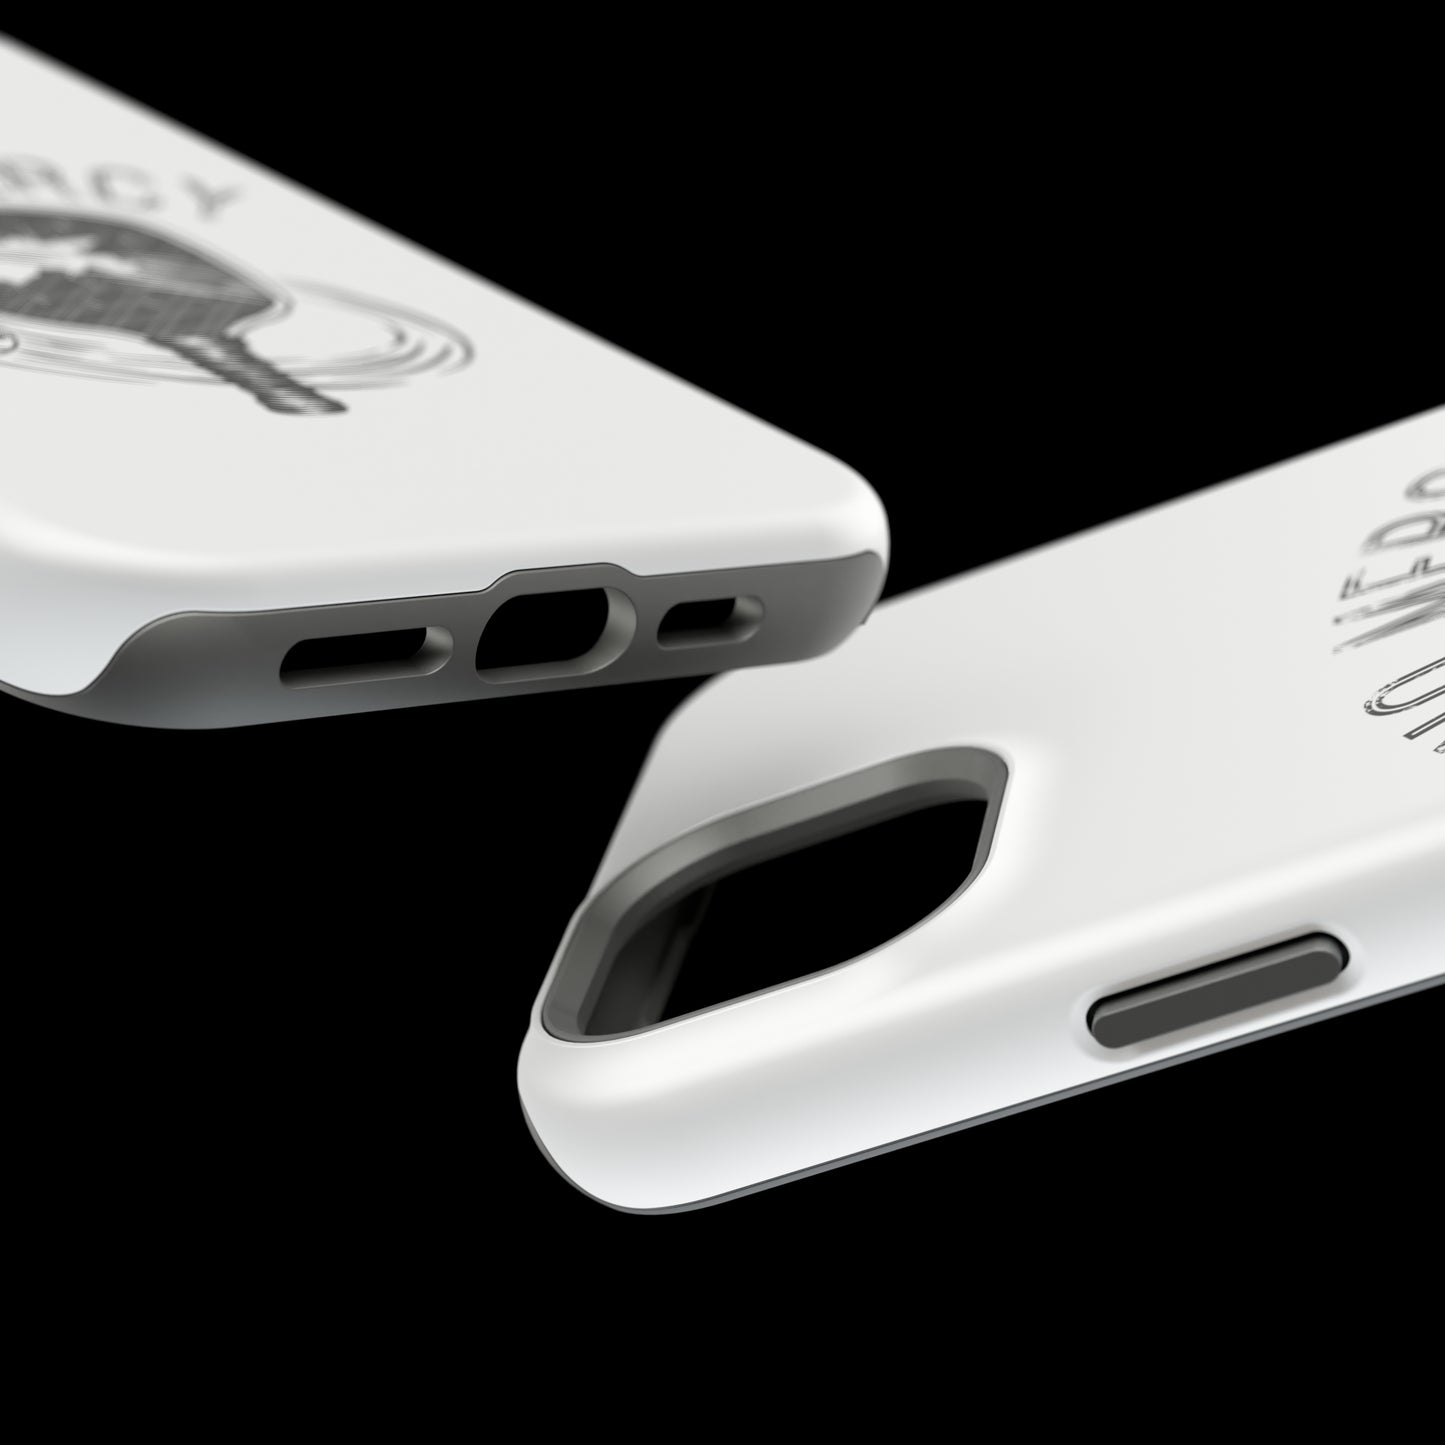 No Mercy Pickleball Series - MagSafe Tough Dual-Layer Phone Case for Apple iPhone